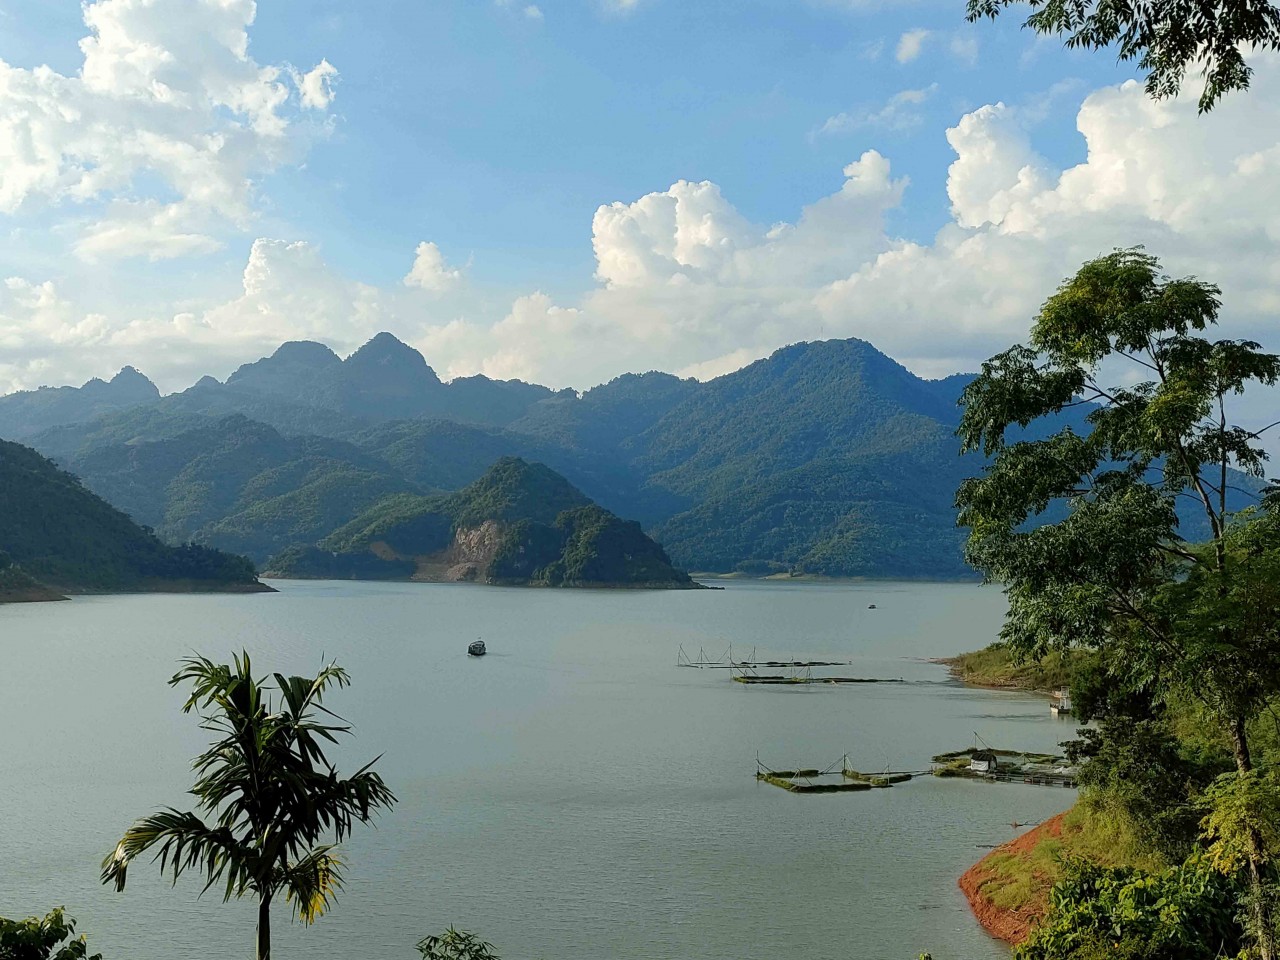 Du Lich Around: Mai Chau - The Ideal Weekend Retreat from the City